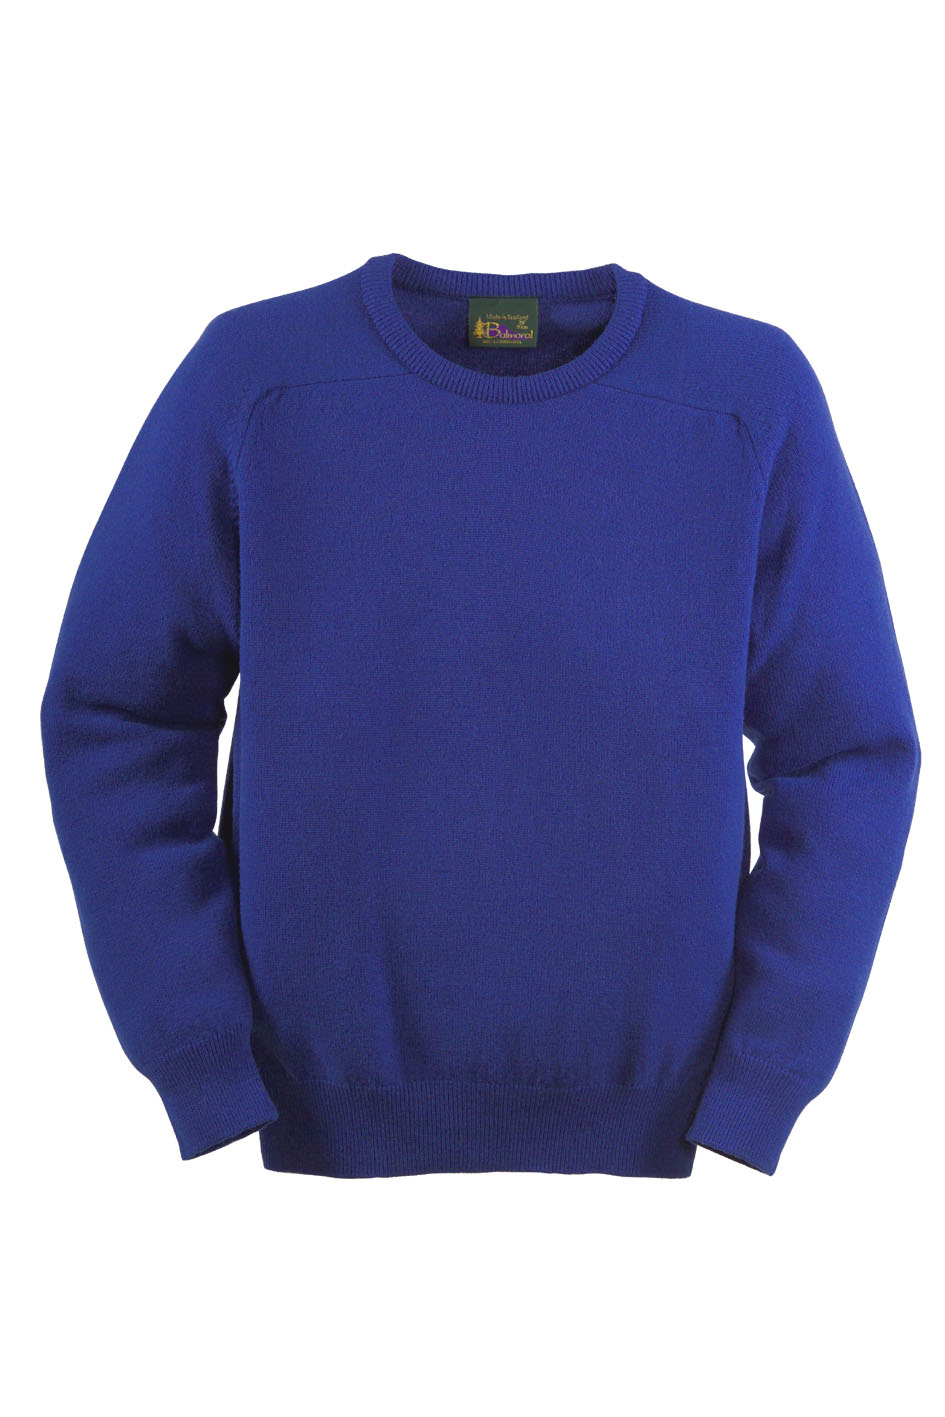 Balmoral Lambswool Crew or Vneck pullover 